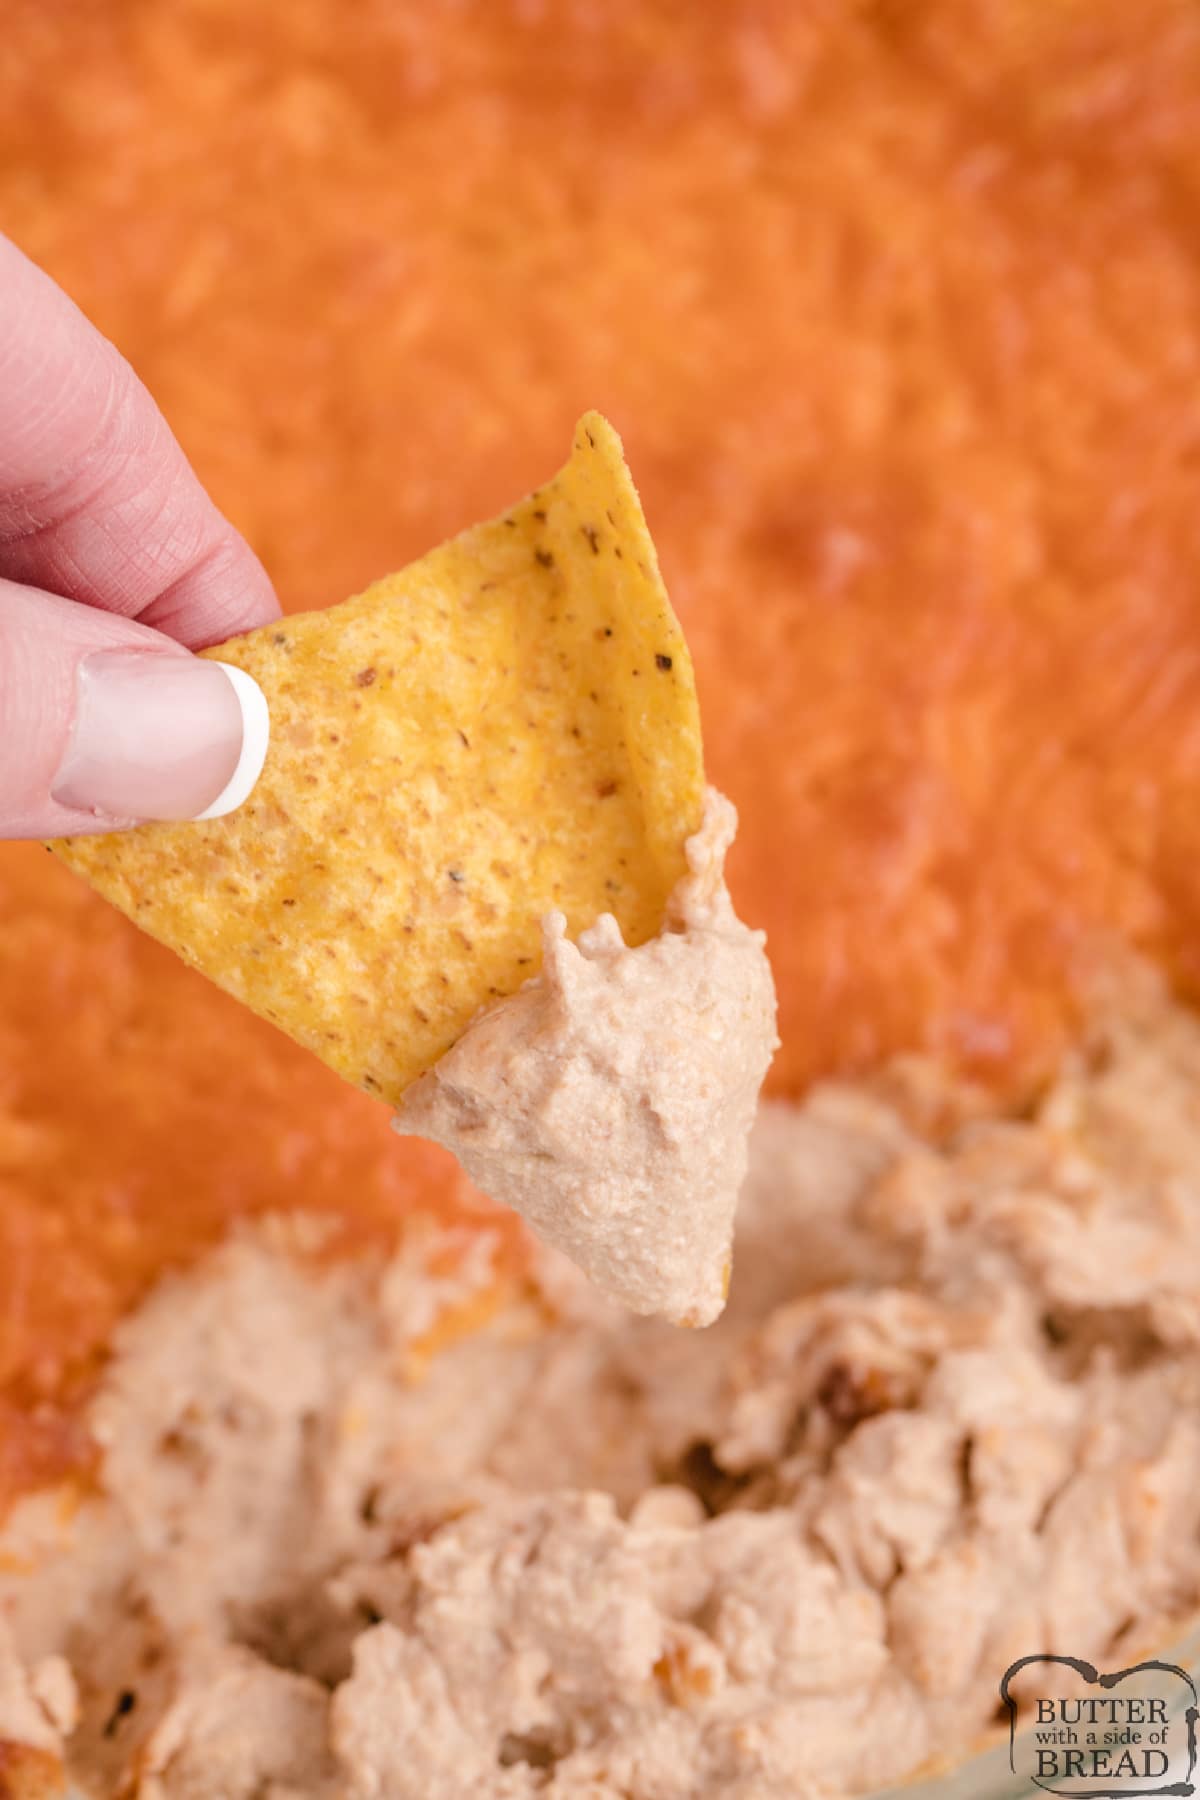 Green Chile Bean Dip is made with just 5 ingredients and is a delicious chip dip! Made with refried beans, cheese, sour cream and salsa, this simple dip is the perfect appetizer. 